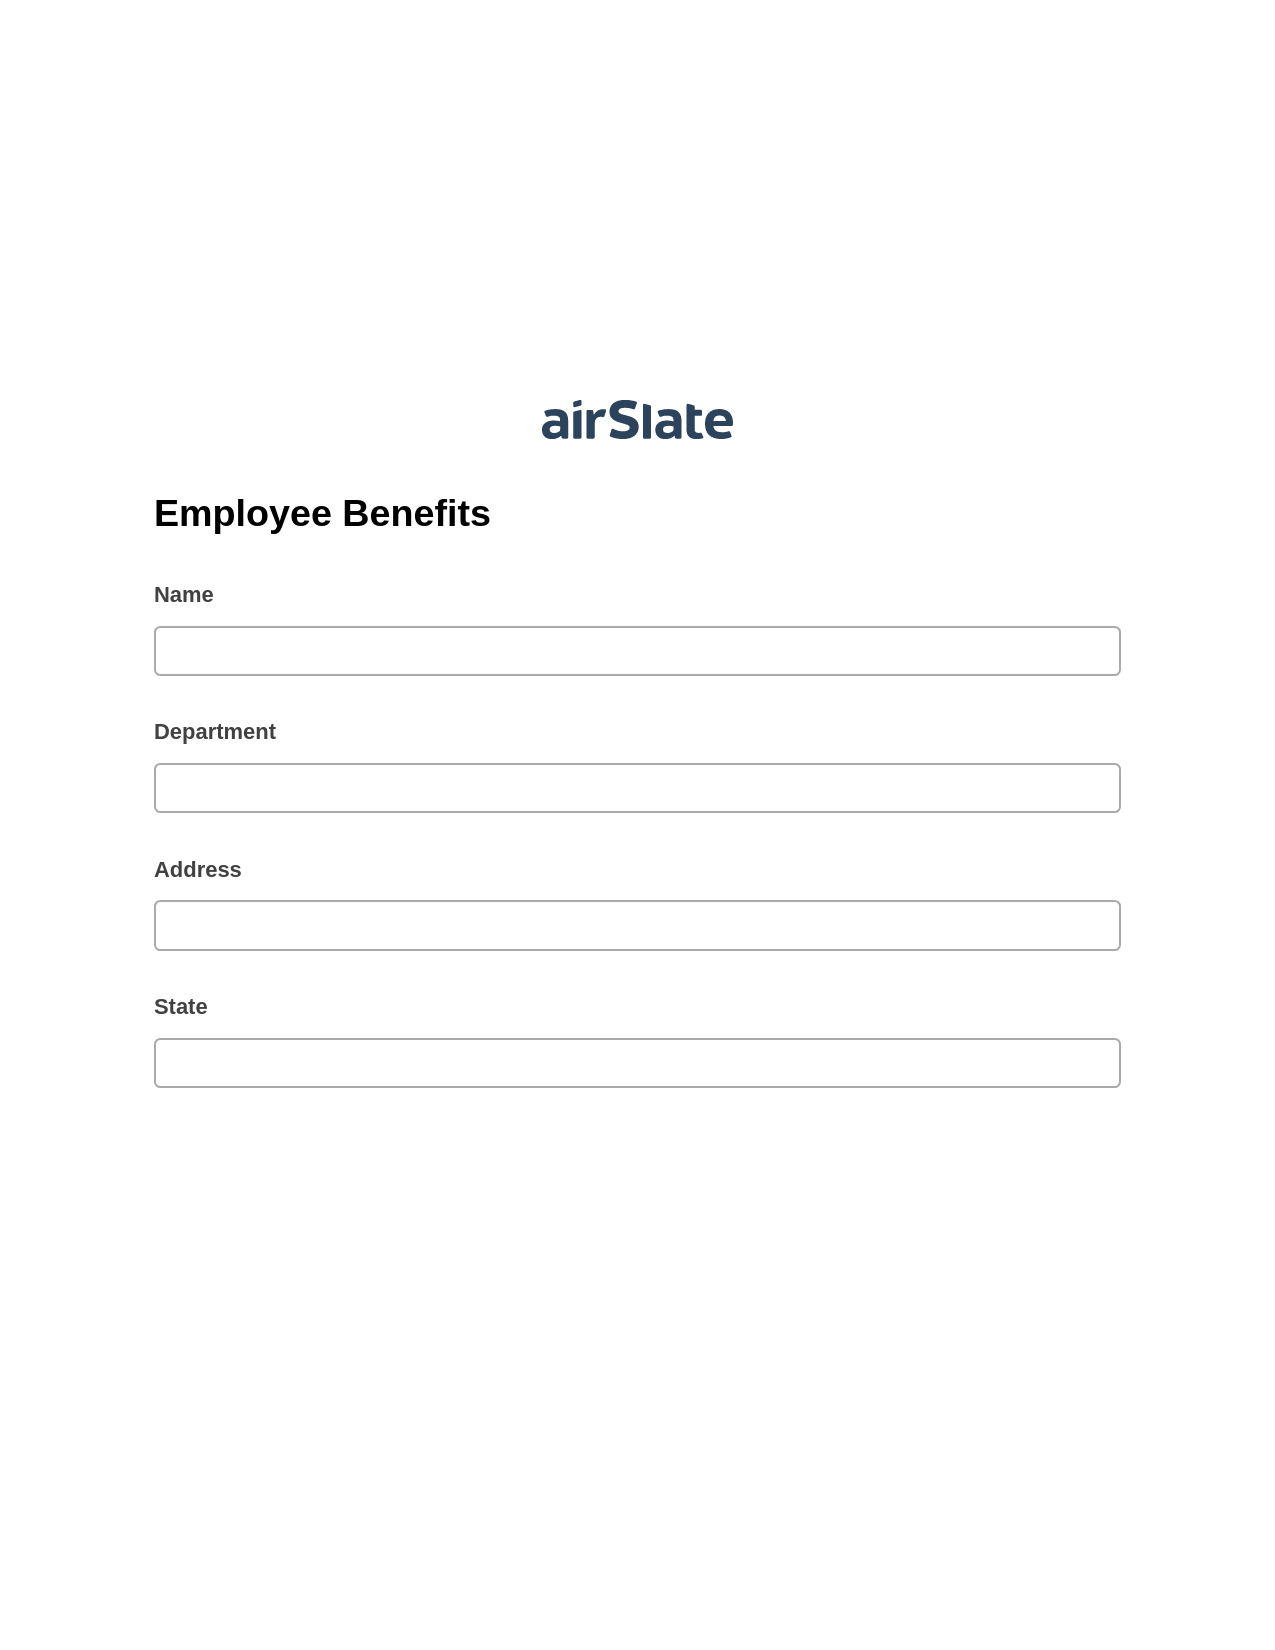 Employee Benefits System Bot - Slack Two-Way Binding Bot, Remove Tags From Slate Bot, Post-finish Document Bot